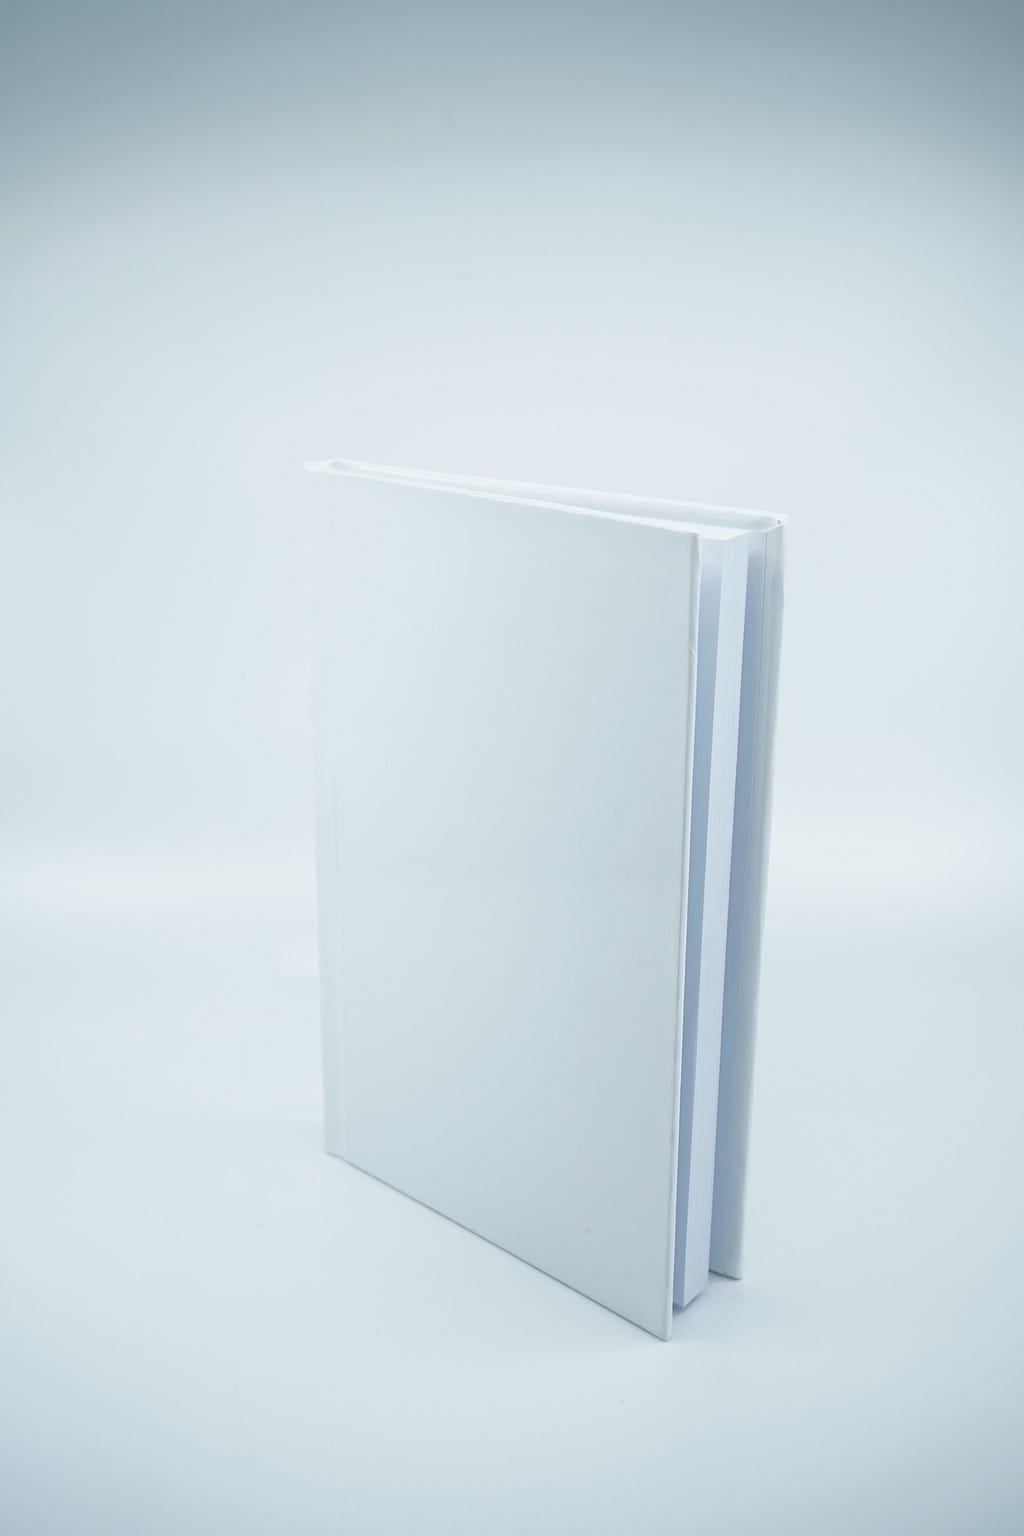 In a white void, a thin hardcover book with a plain white cover and no text stands upright.